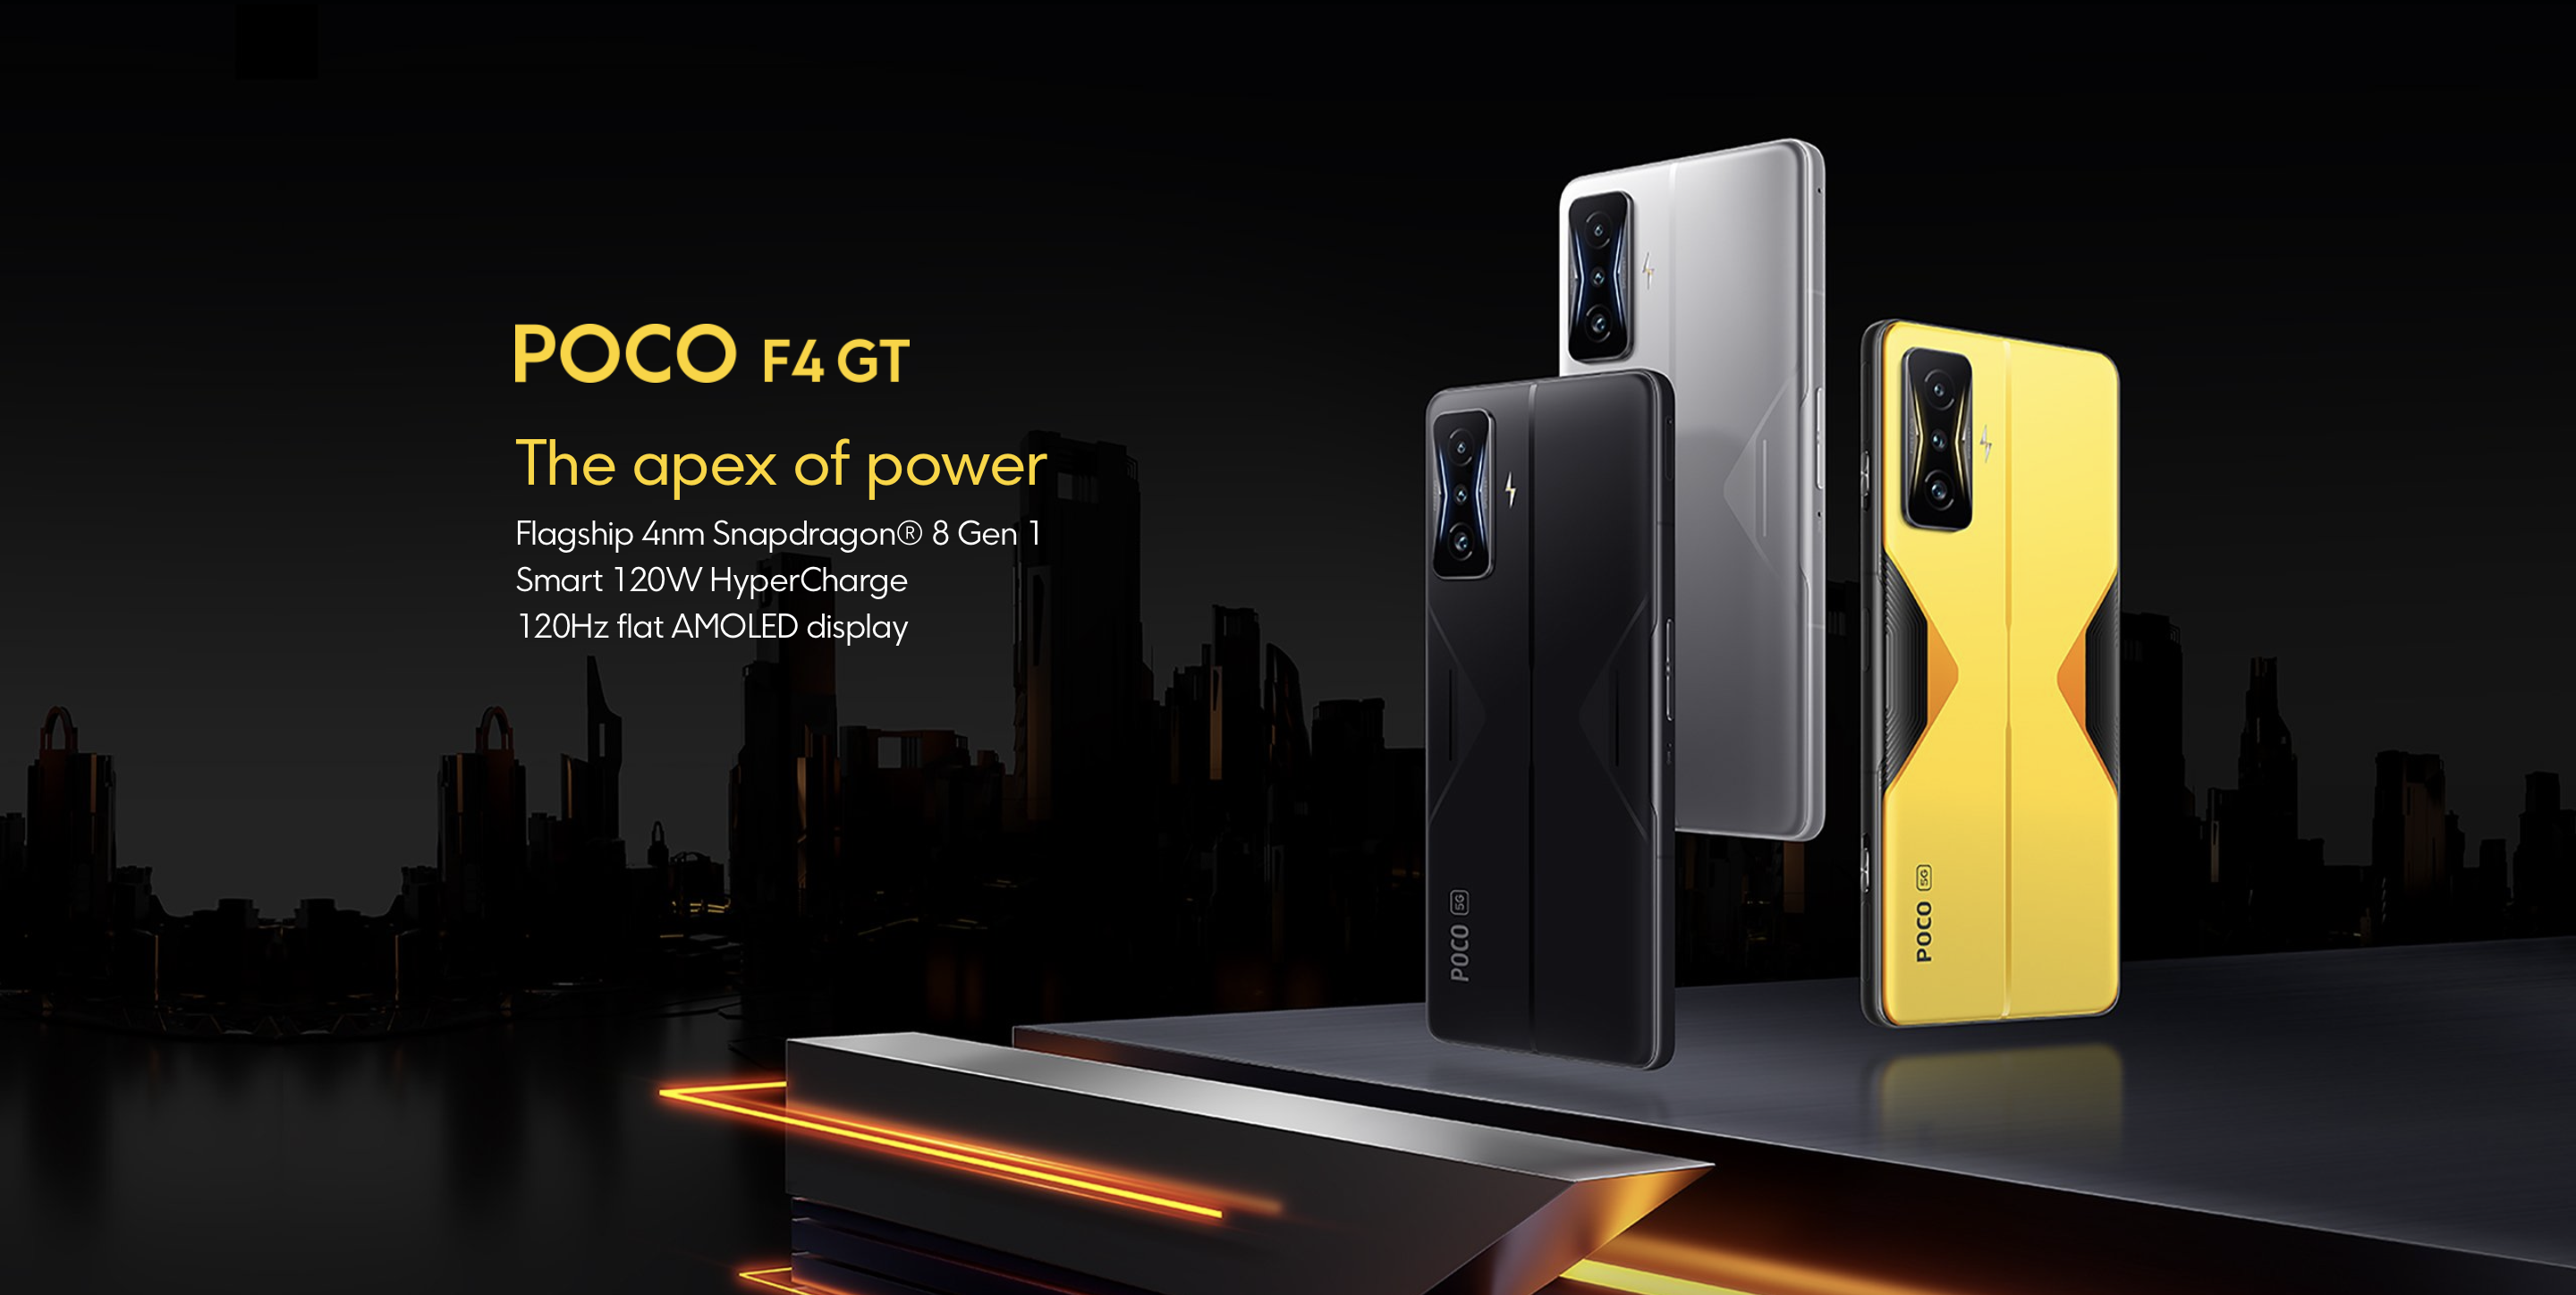 POCO F4 GT: gaming smartphone with Snapdragon 8 Gen 1 chip and 120W charging for 500 euros